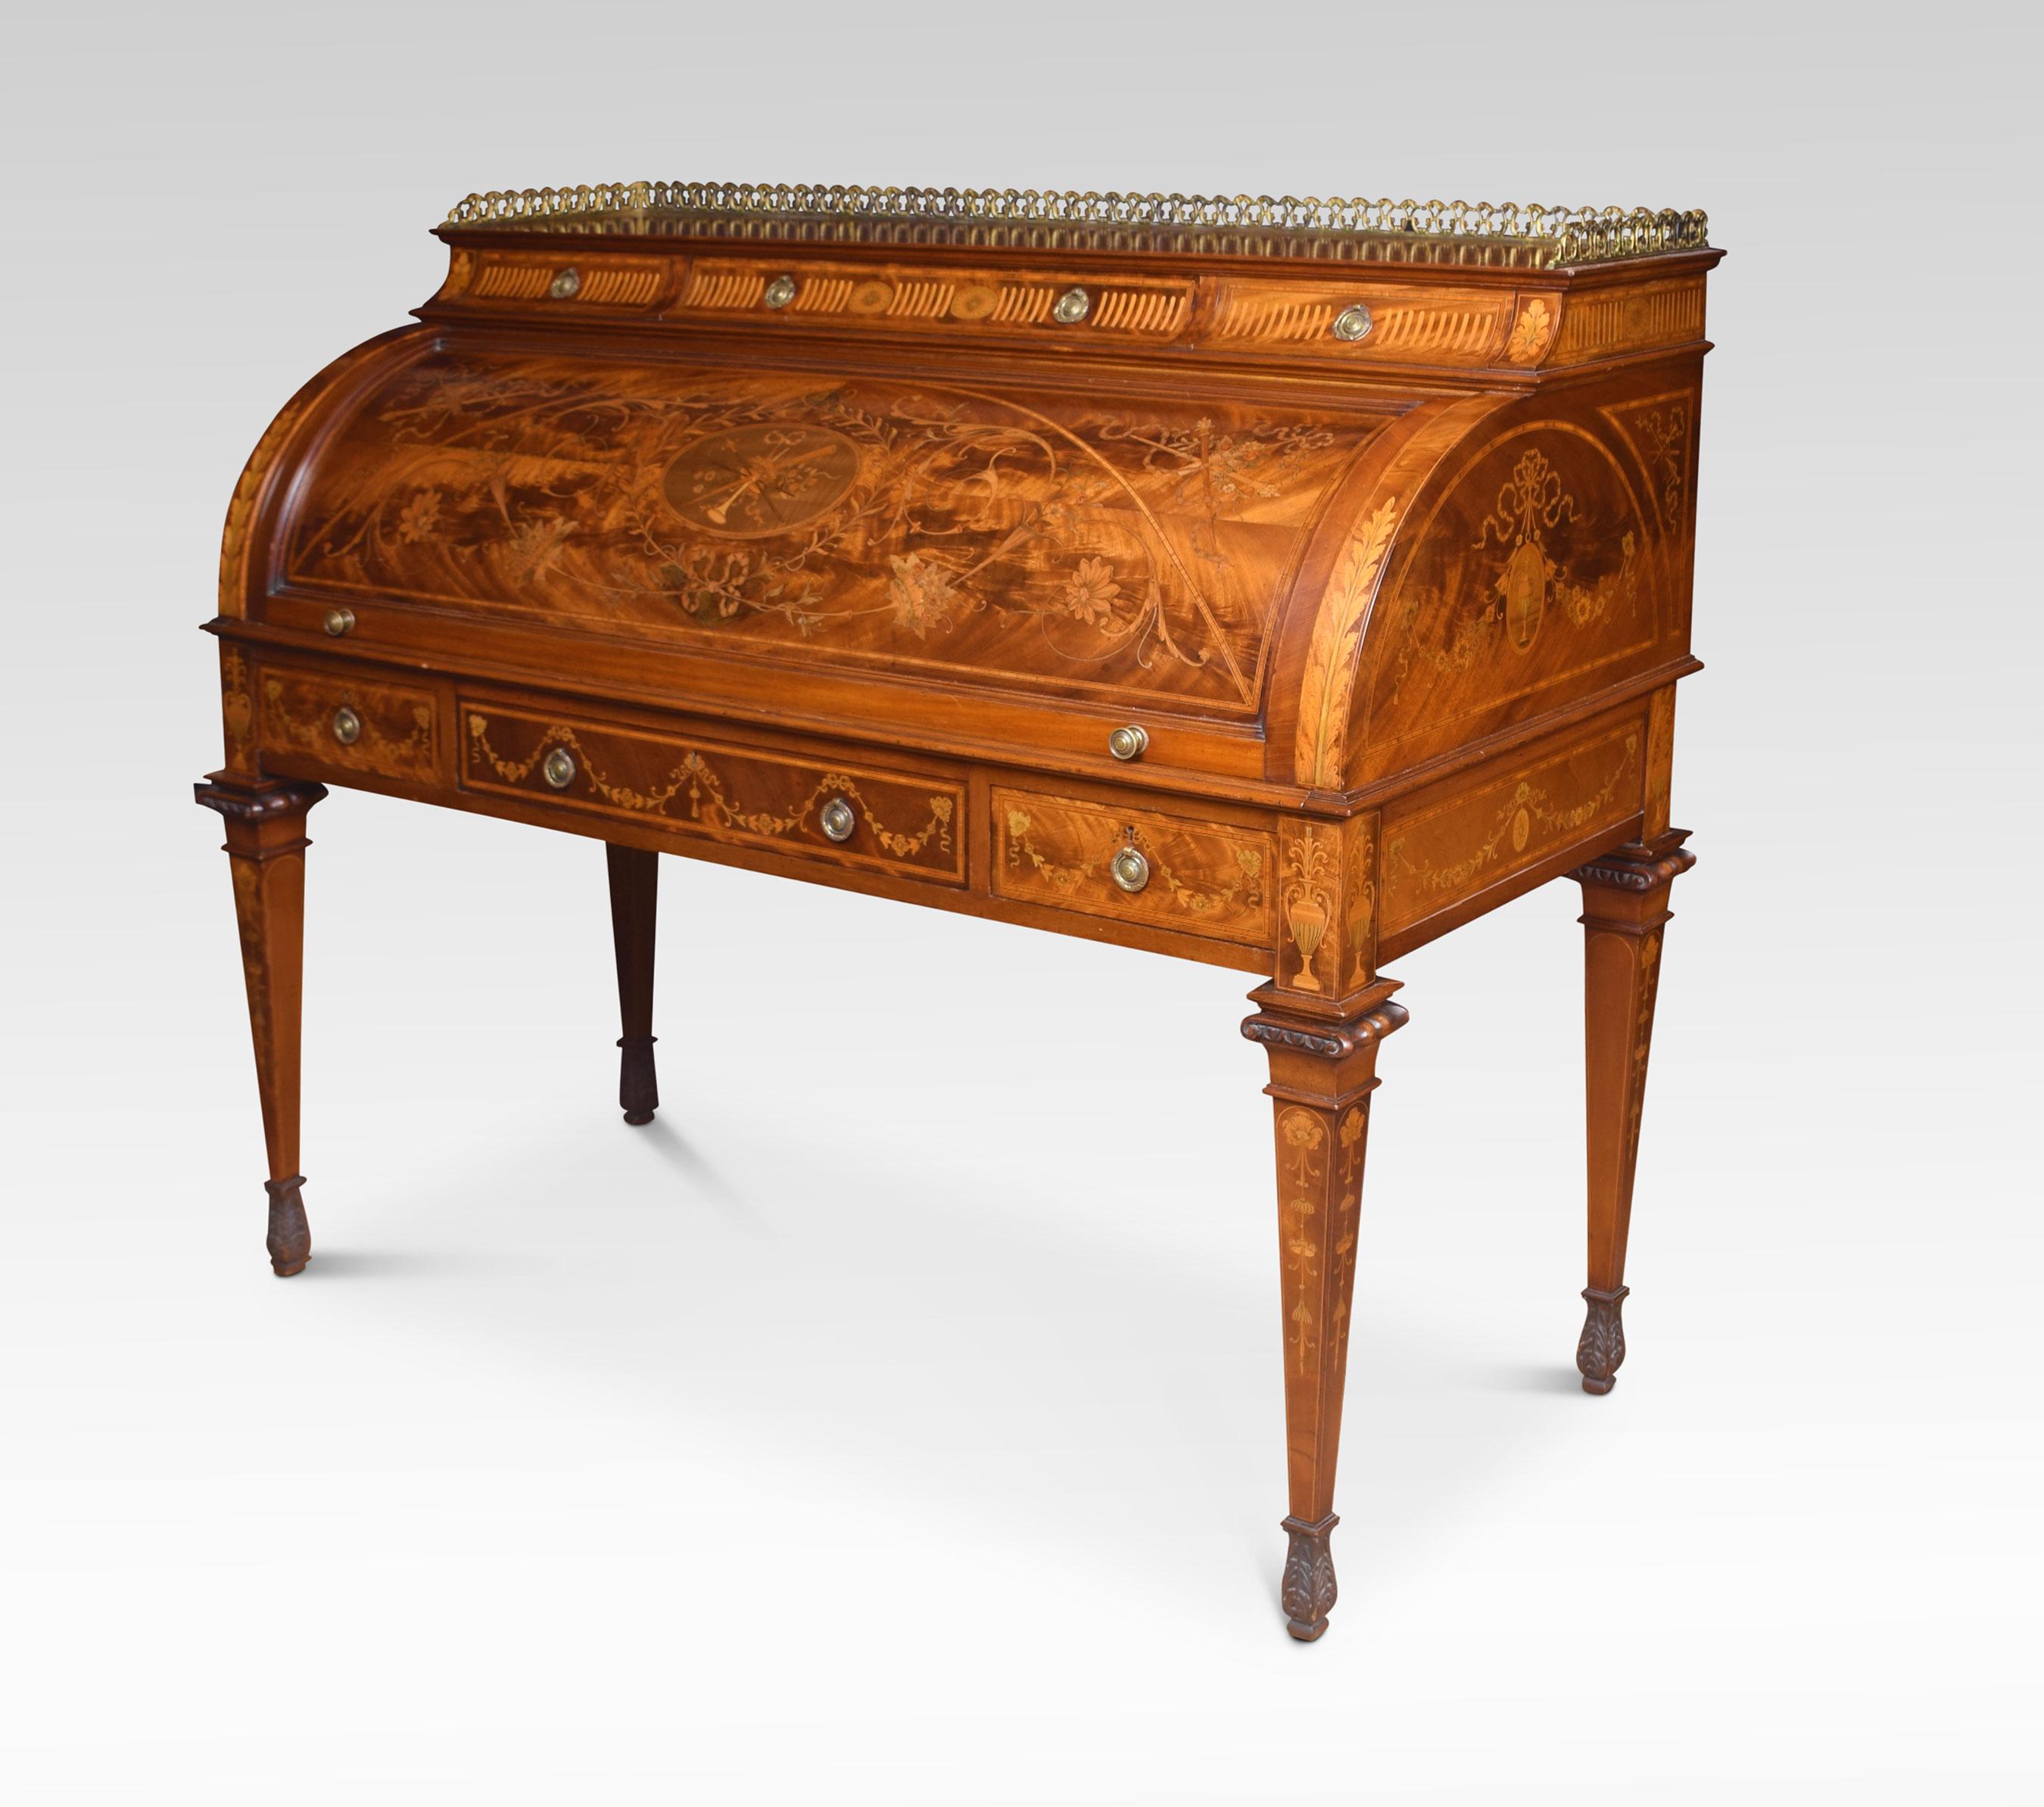 A substantial Sheraton Revival flame mahogany and satinwood crossbanded cylinder bureau, the ornate raised gallery over three cushion frieze drawers with brass tooled handles, above a profusely inlaid cylinder front. The decorative subject matter